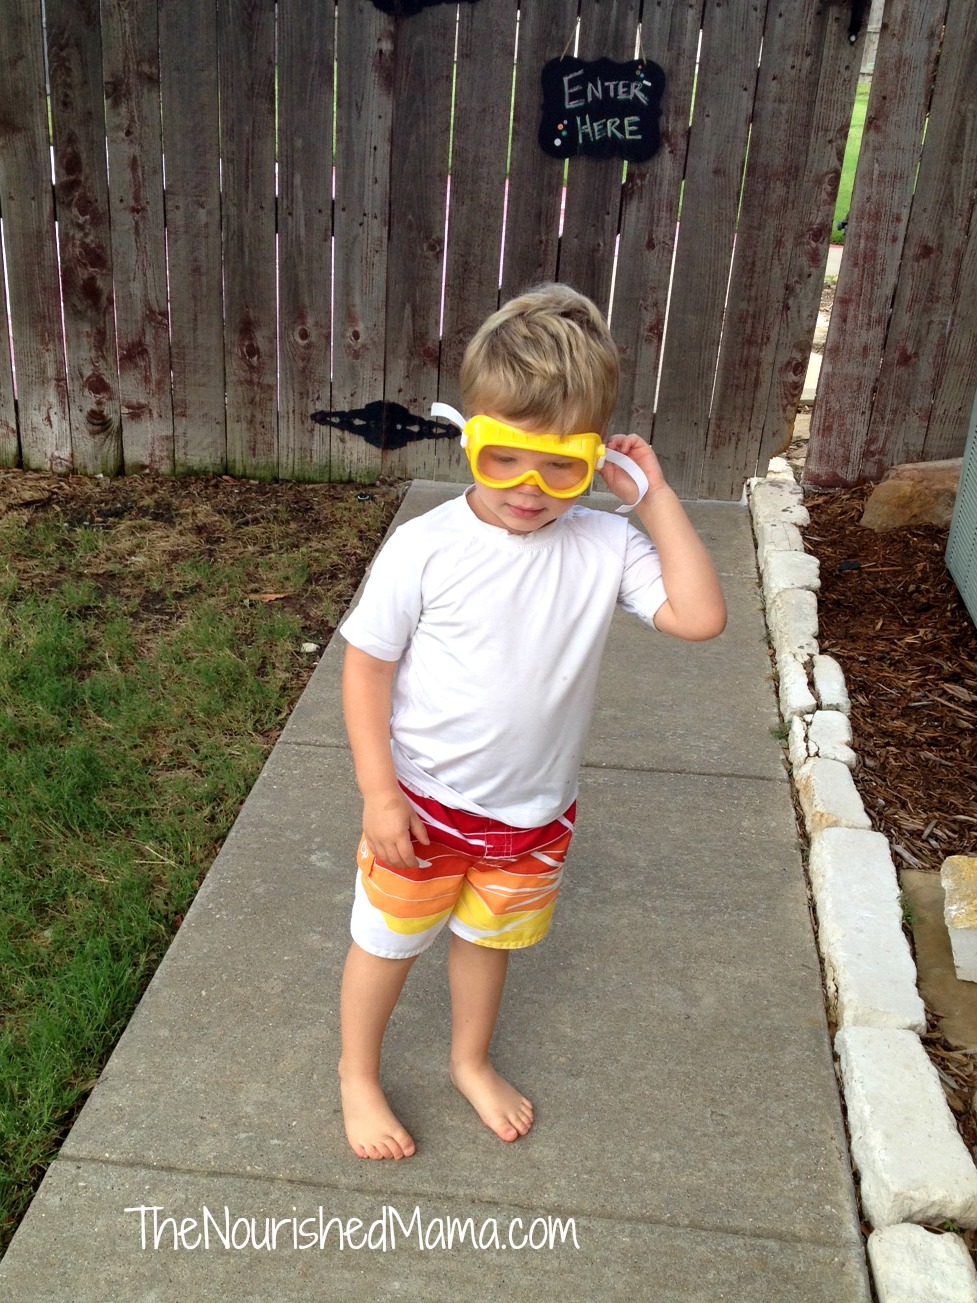 Heading to swim with his "goggles" on.